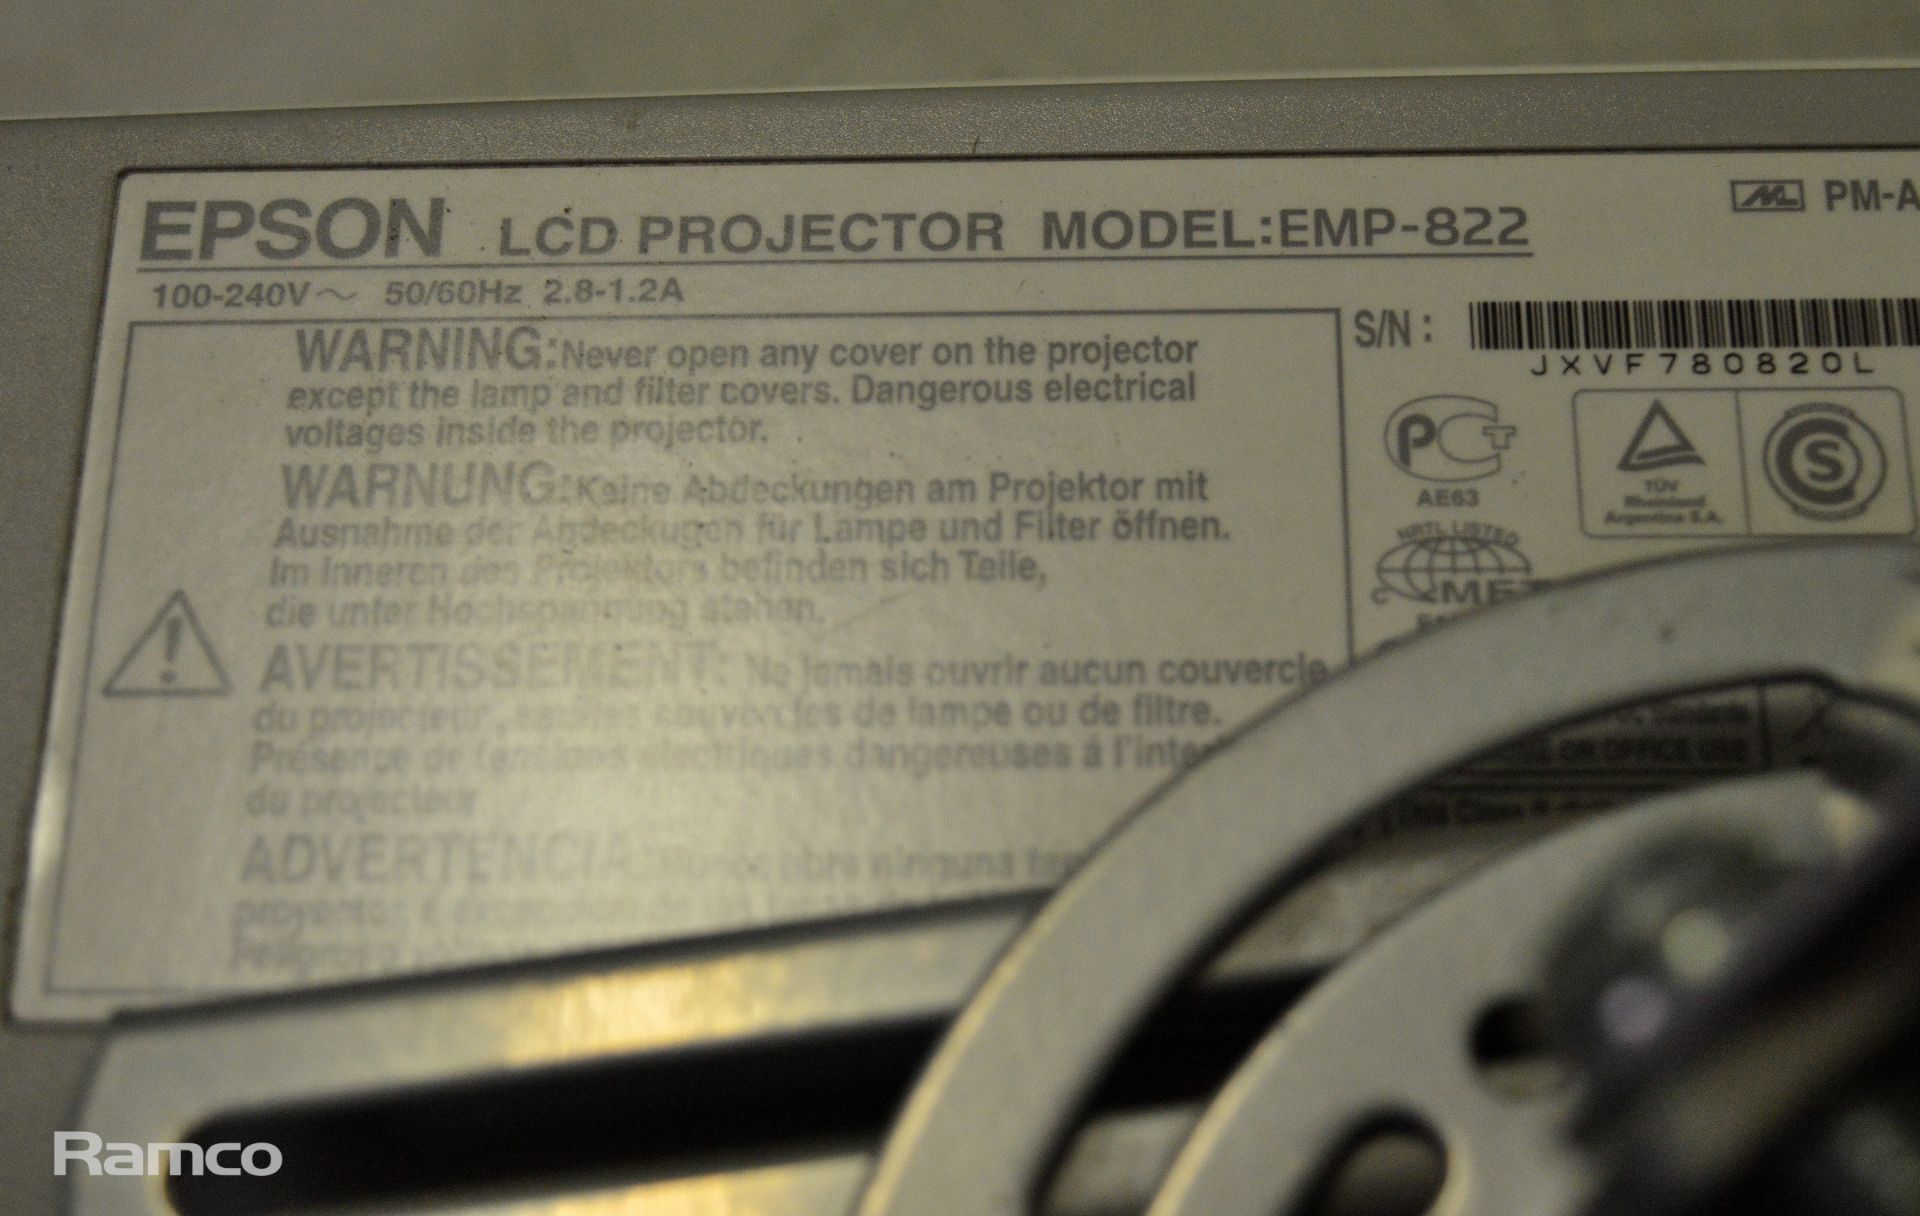 Epson EMP-822 LCD Projector With Mount Bracket - Image 4 of 5